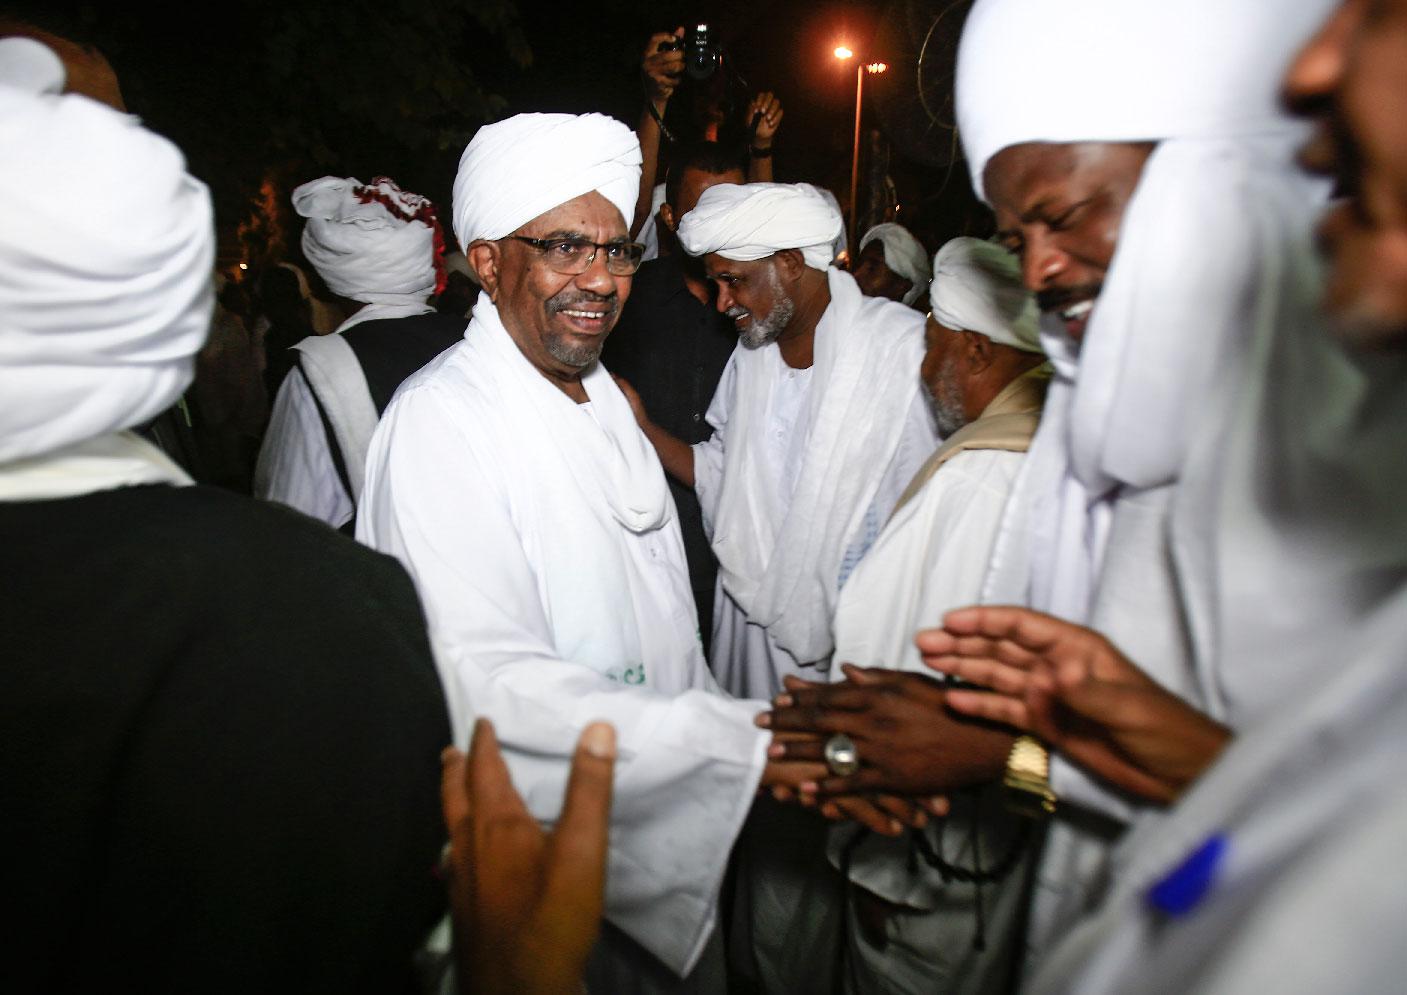 The ICC has issued several warrants for Bashir's arrest